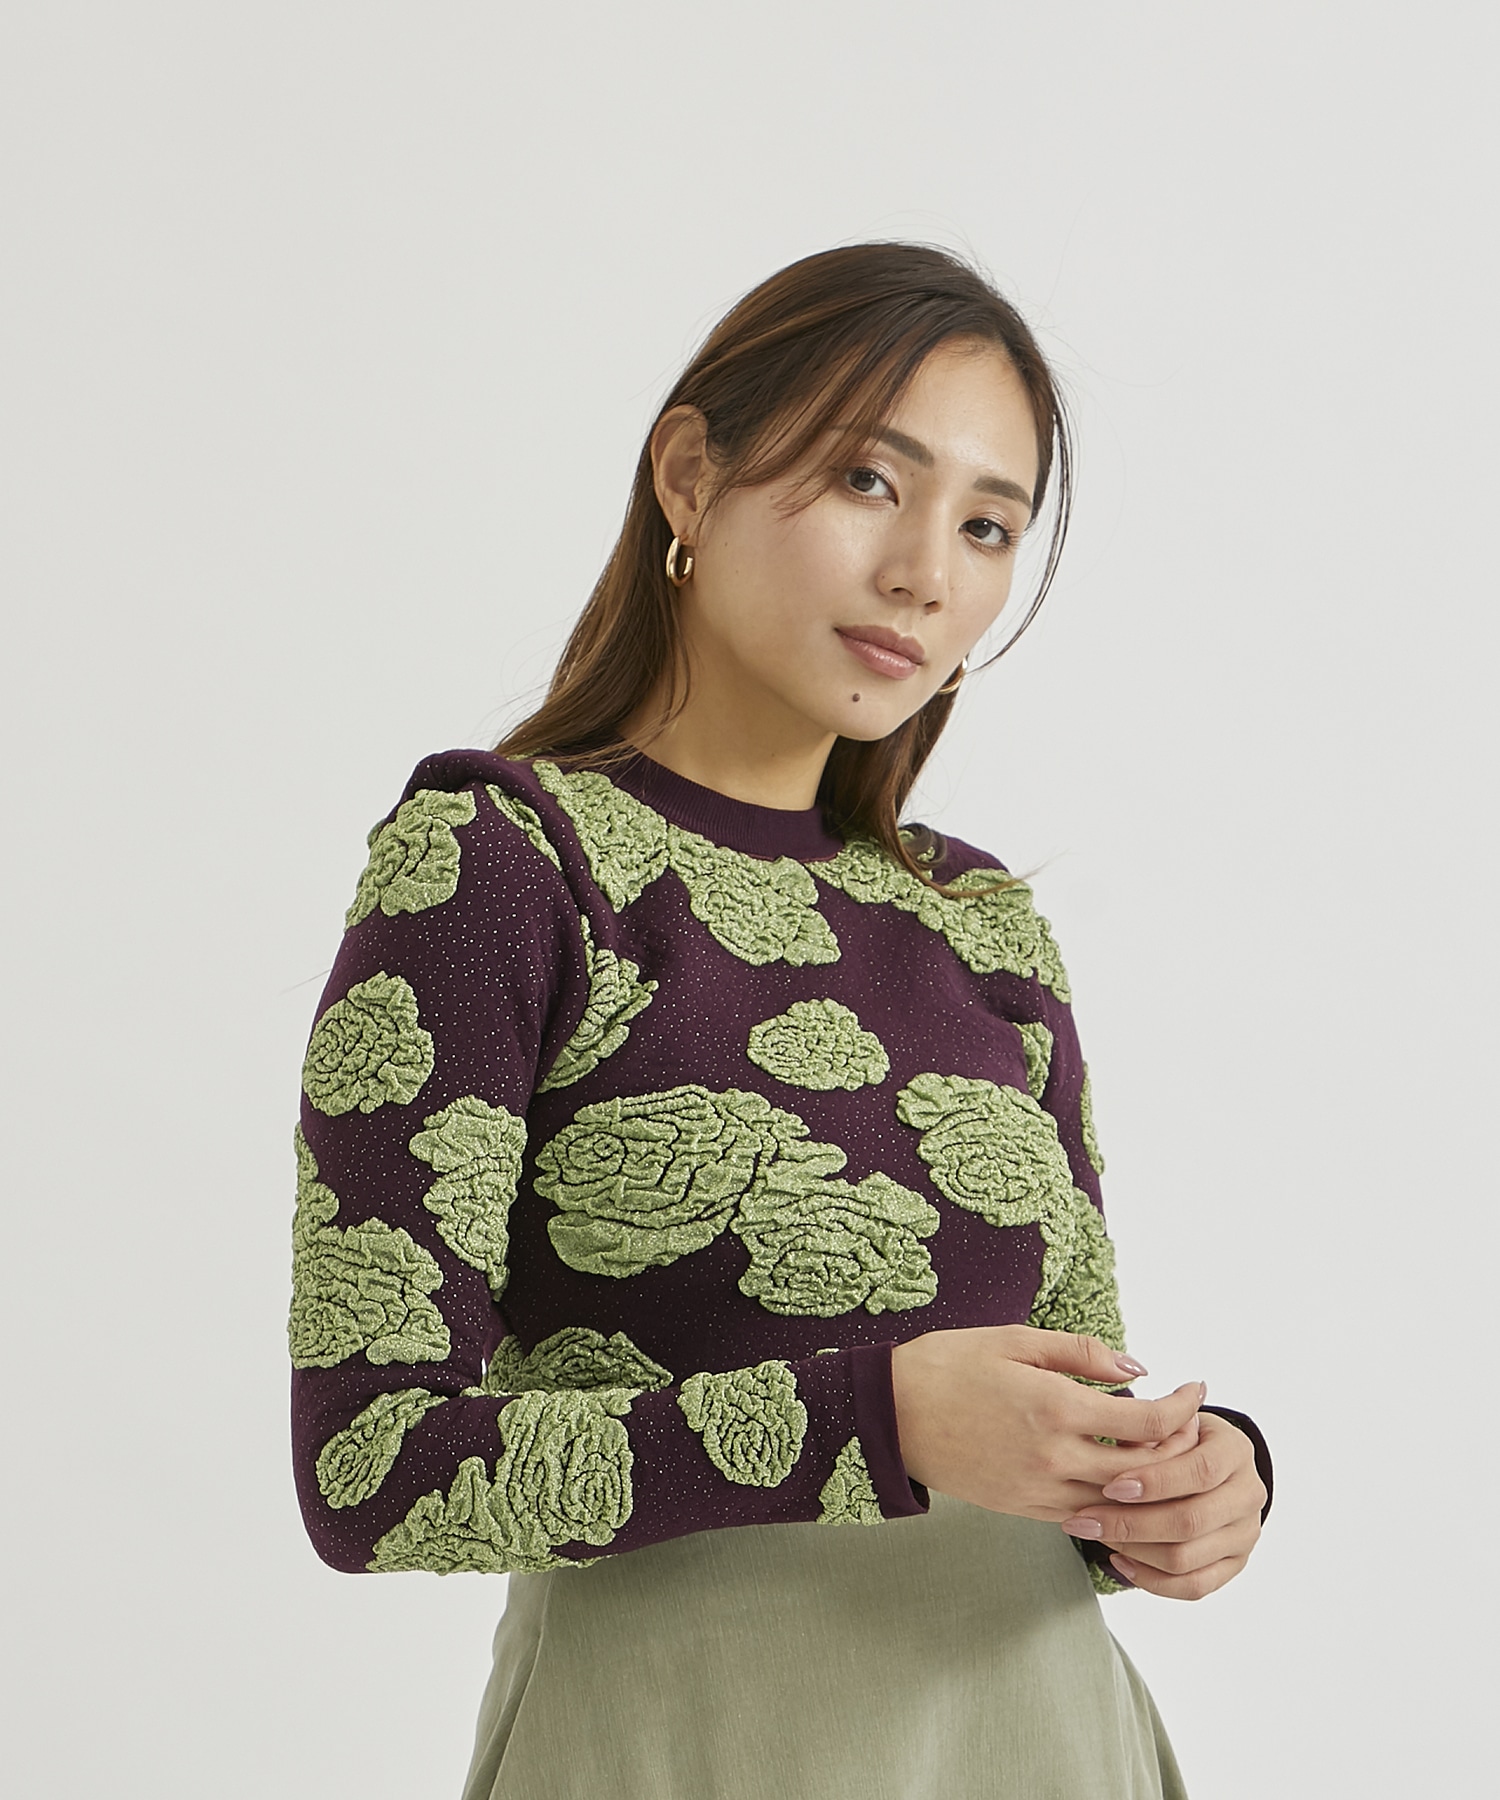 Lame jacquard knit top(36 RED): TOGA: WOMEN｜THE TOKYO ONLINE STORE